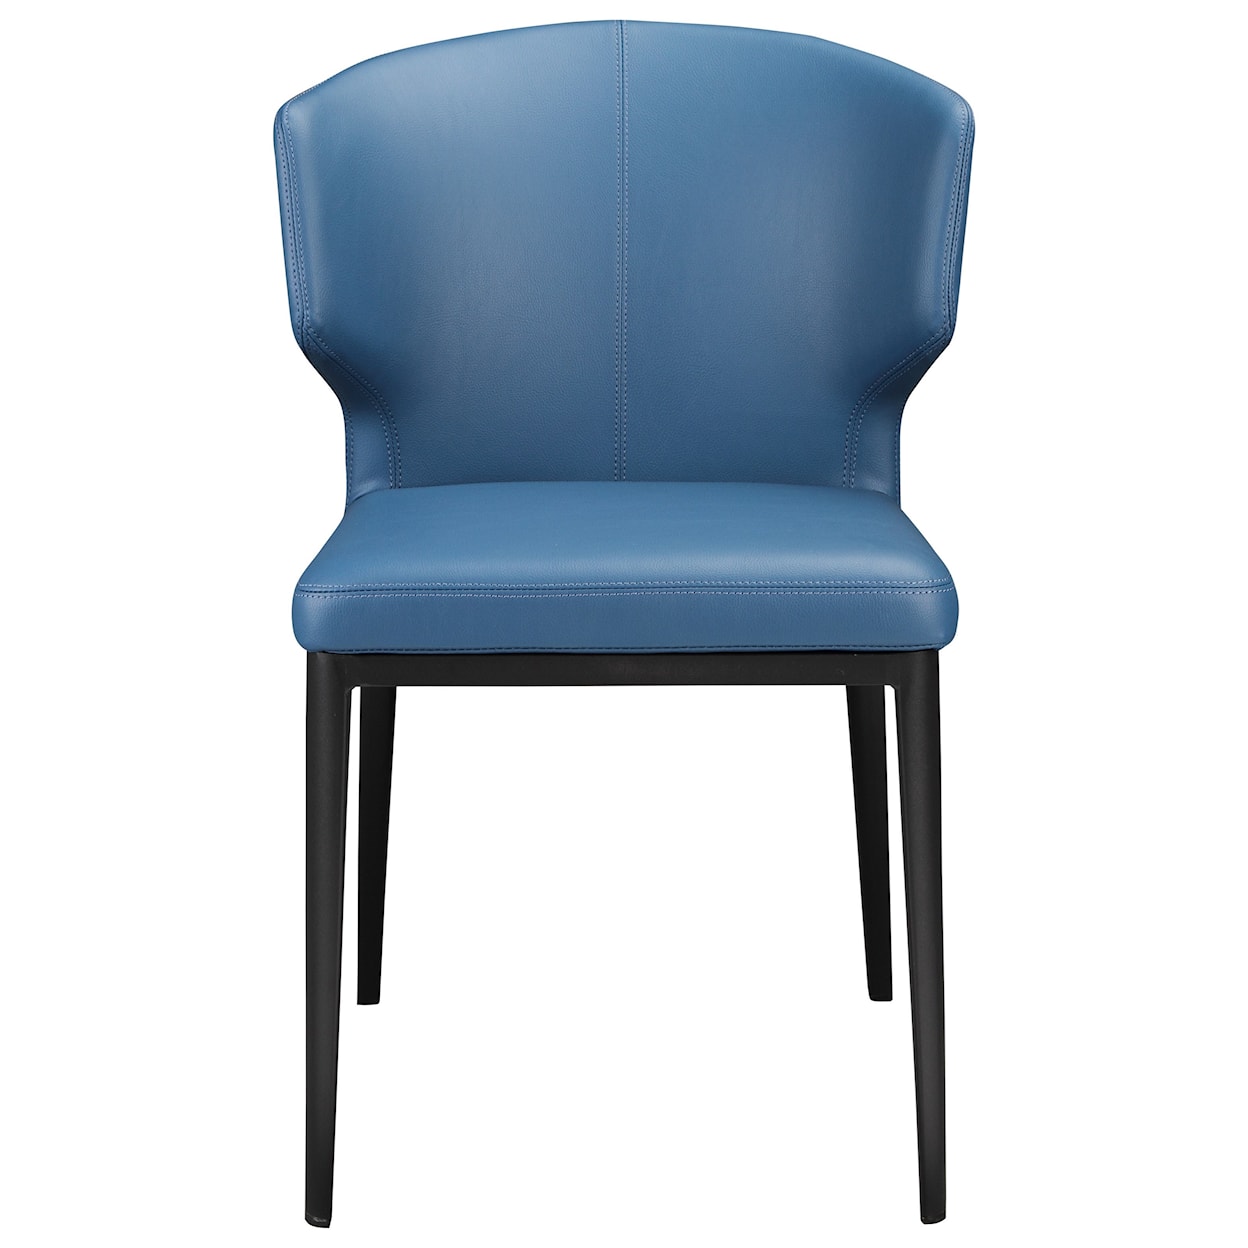 Moe's Home Collection Delaney Side Chair